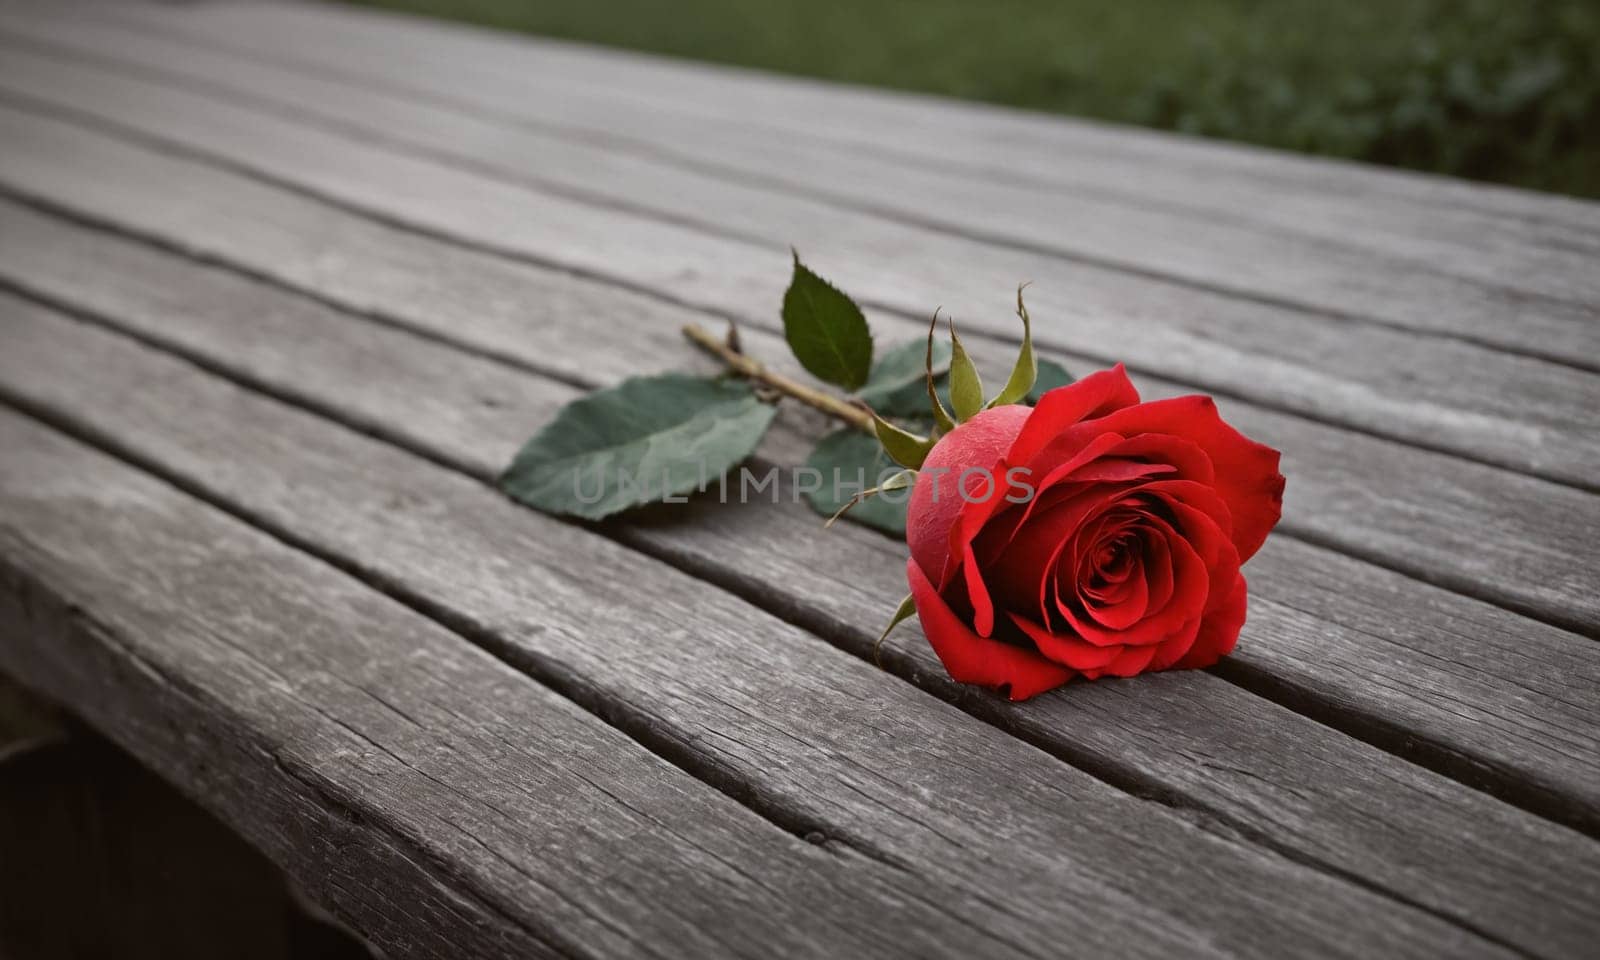 Red Rose Resting on Bench by pippocarlot